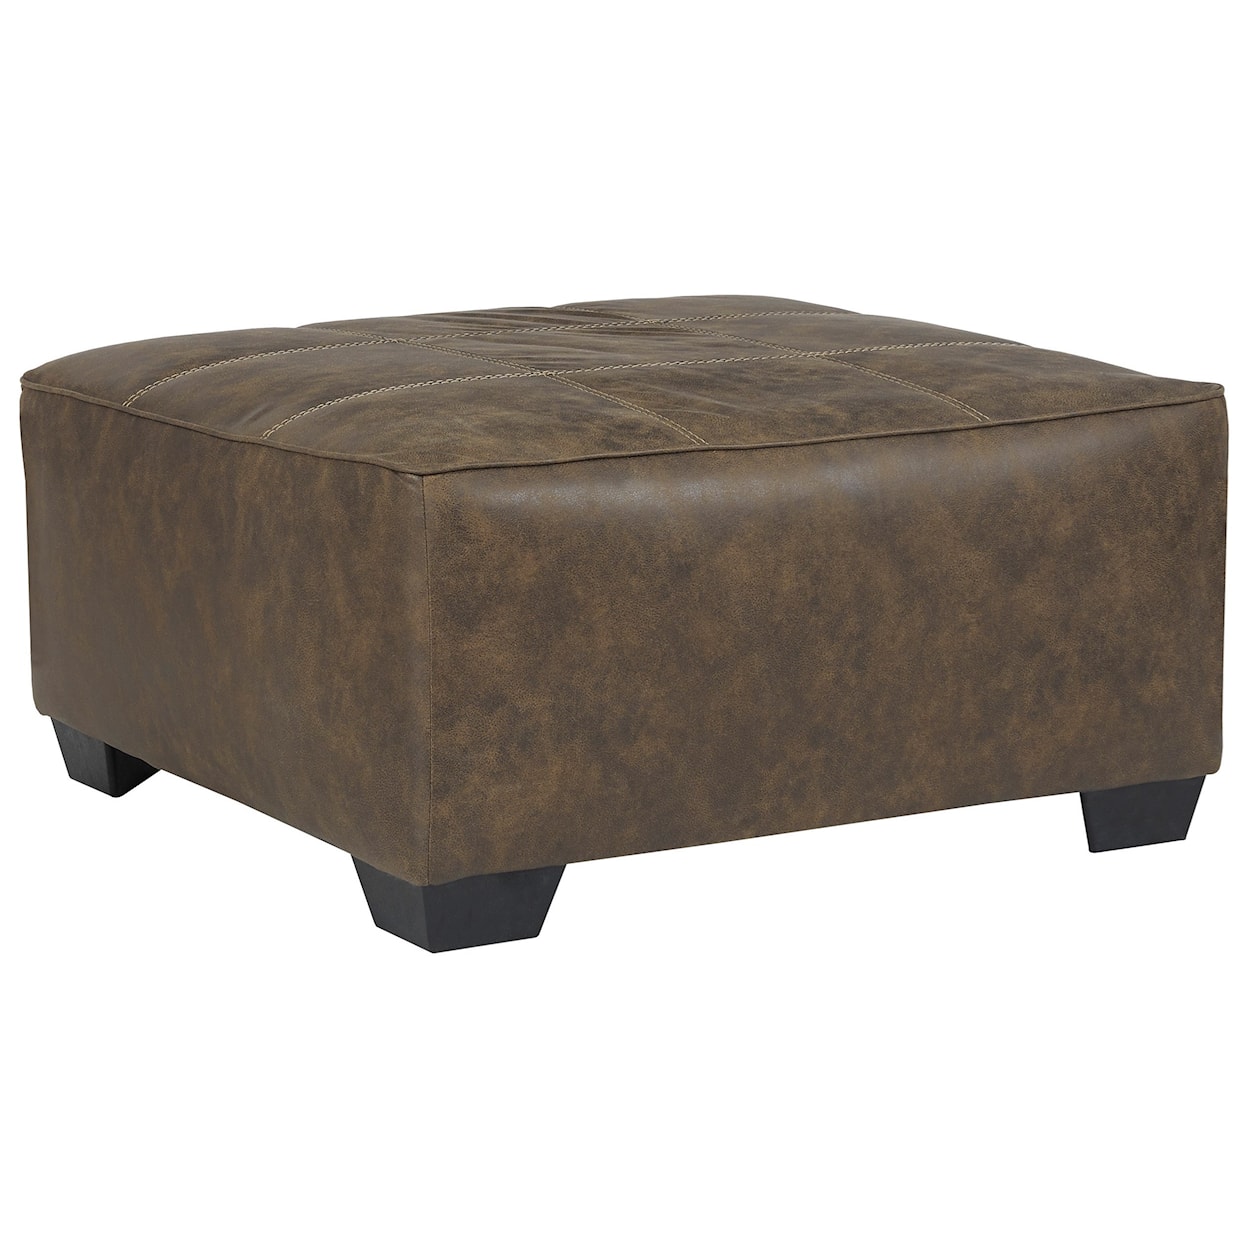 Benchcraft by Ashley Abalone Square Oversized Accent Ottoman